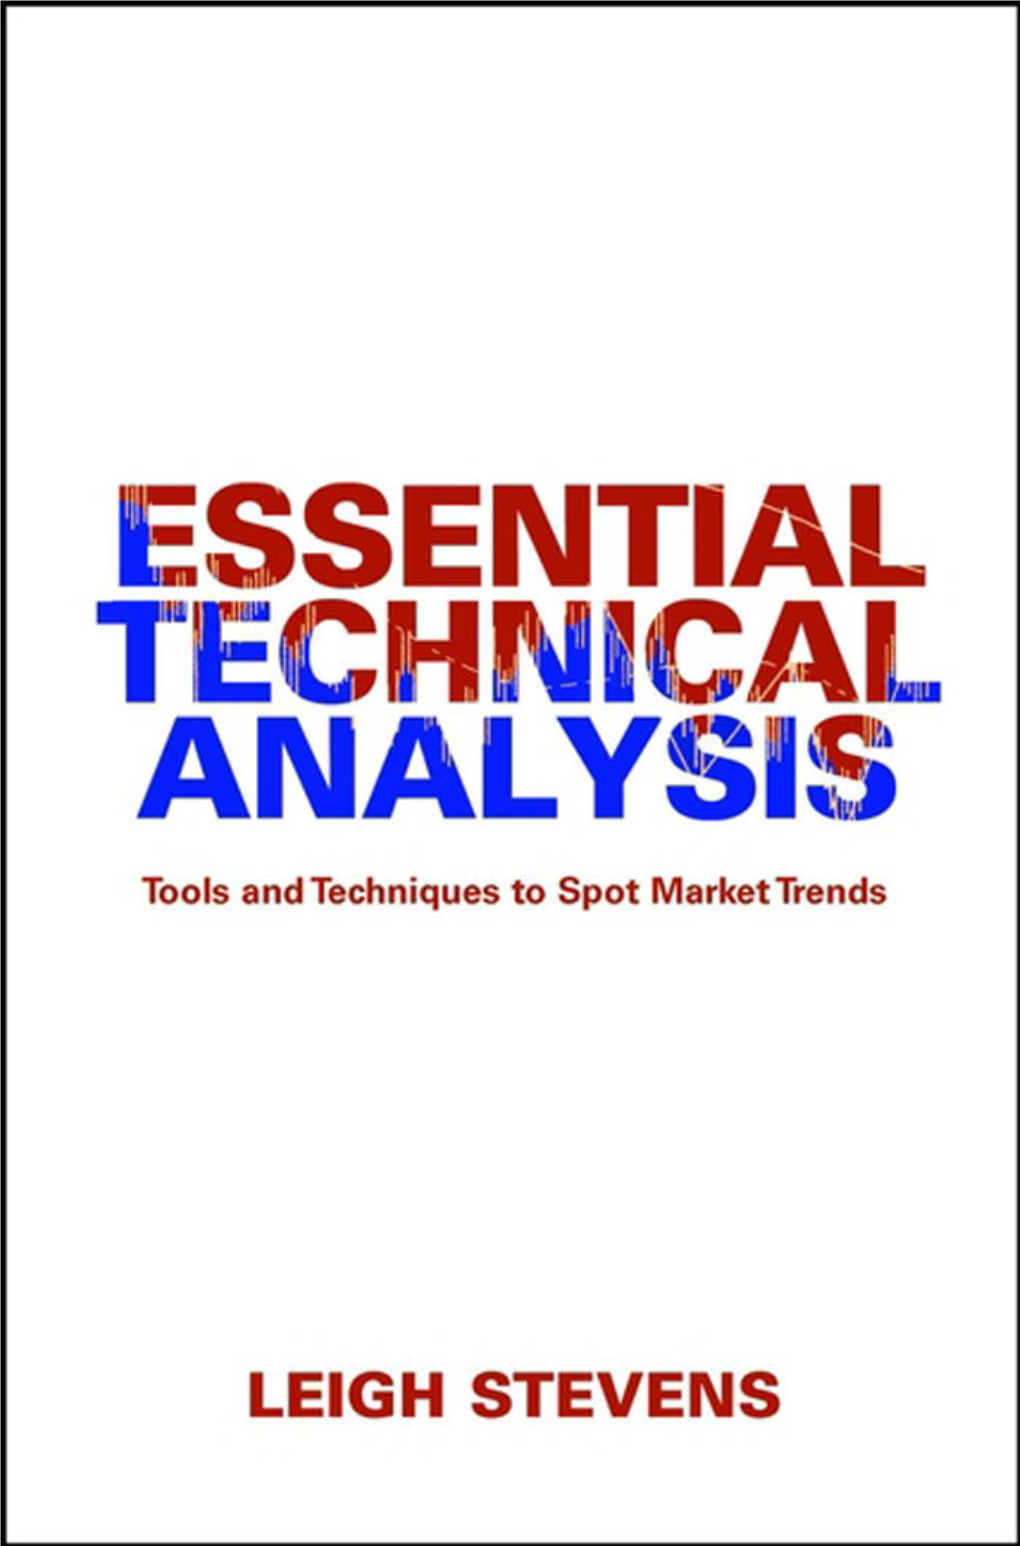 [Stevens]Essential Technical Analysis Tools and Techniques to Spot